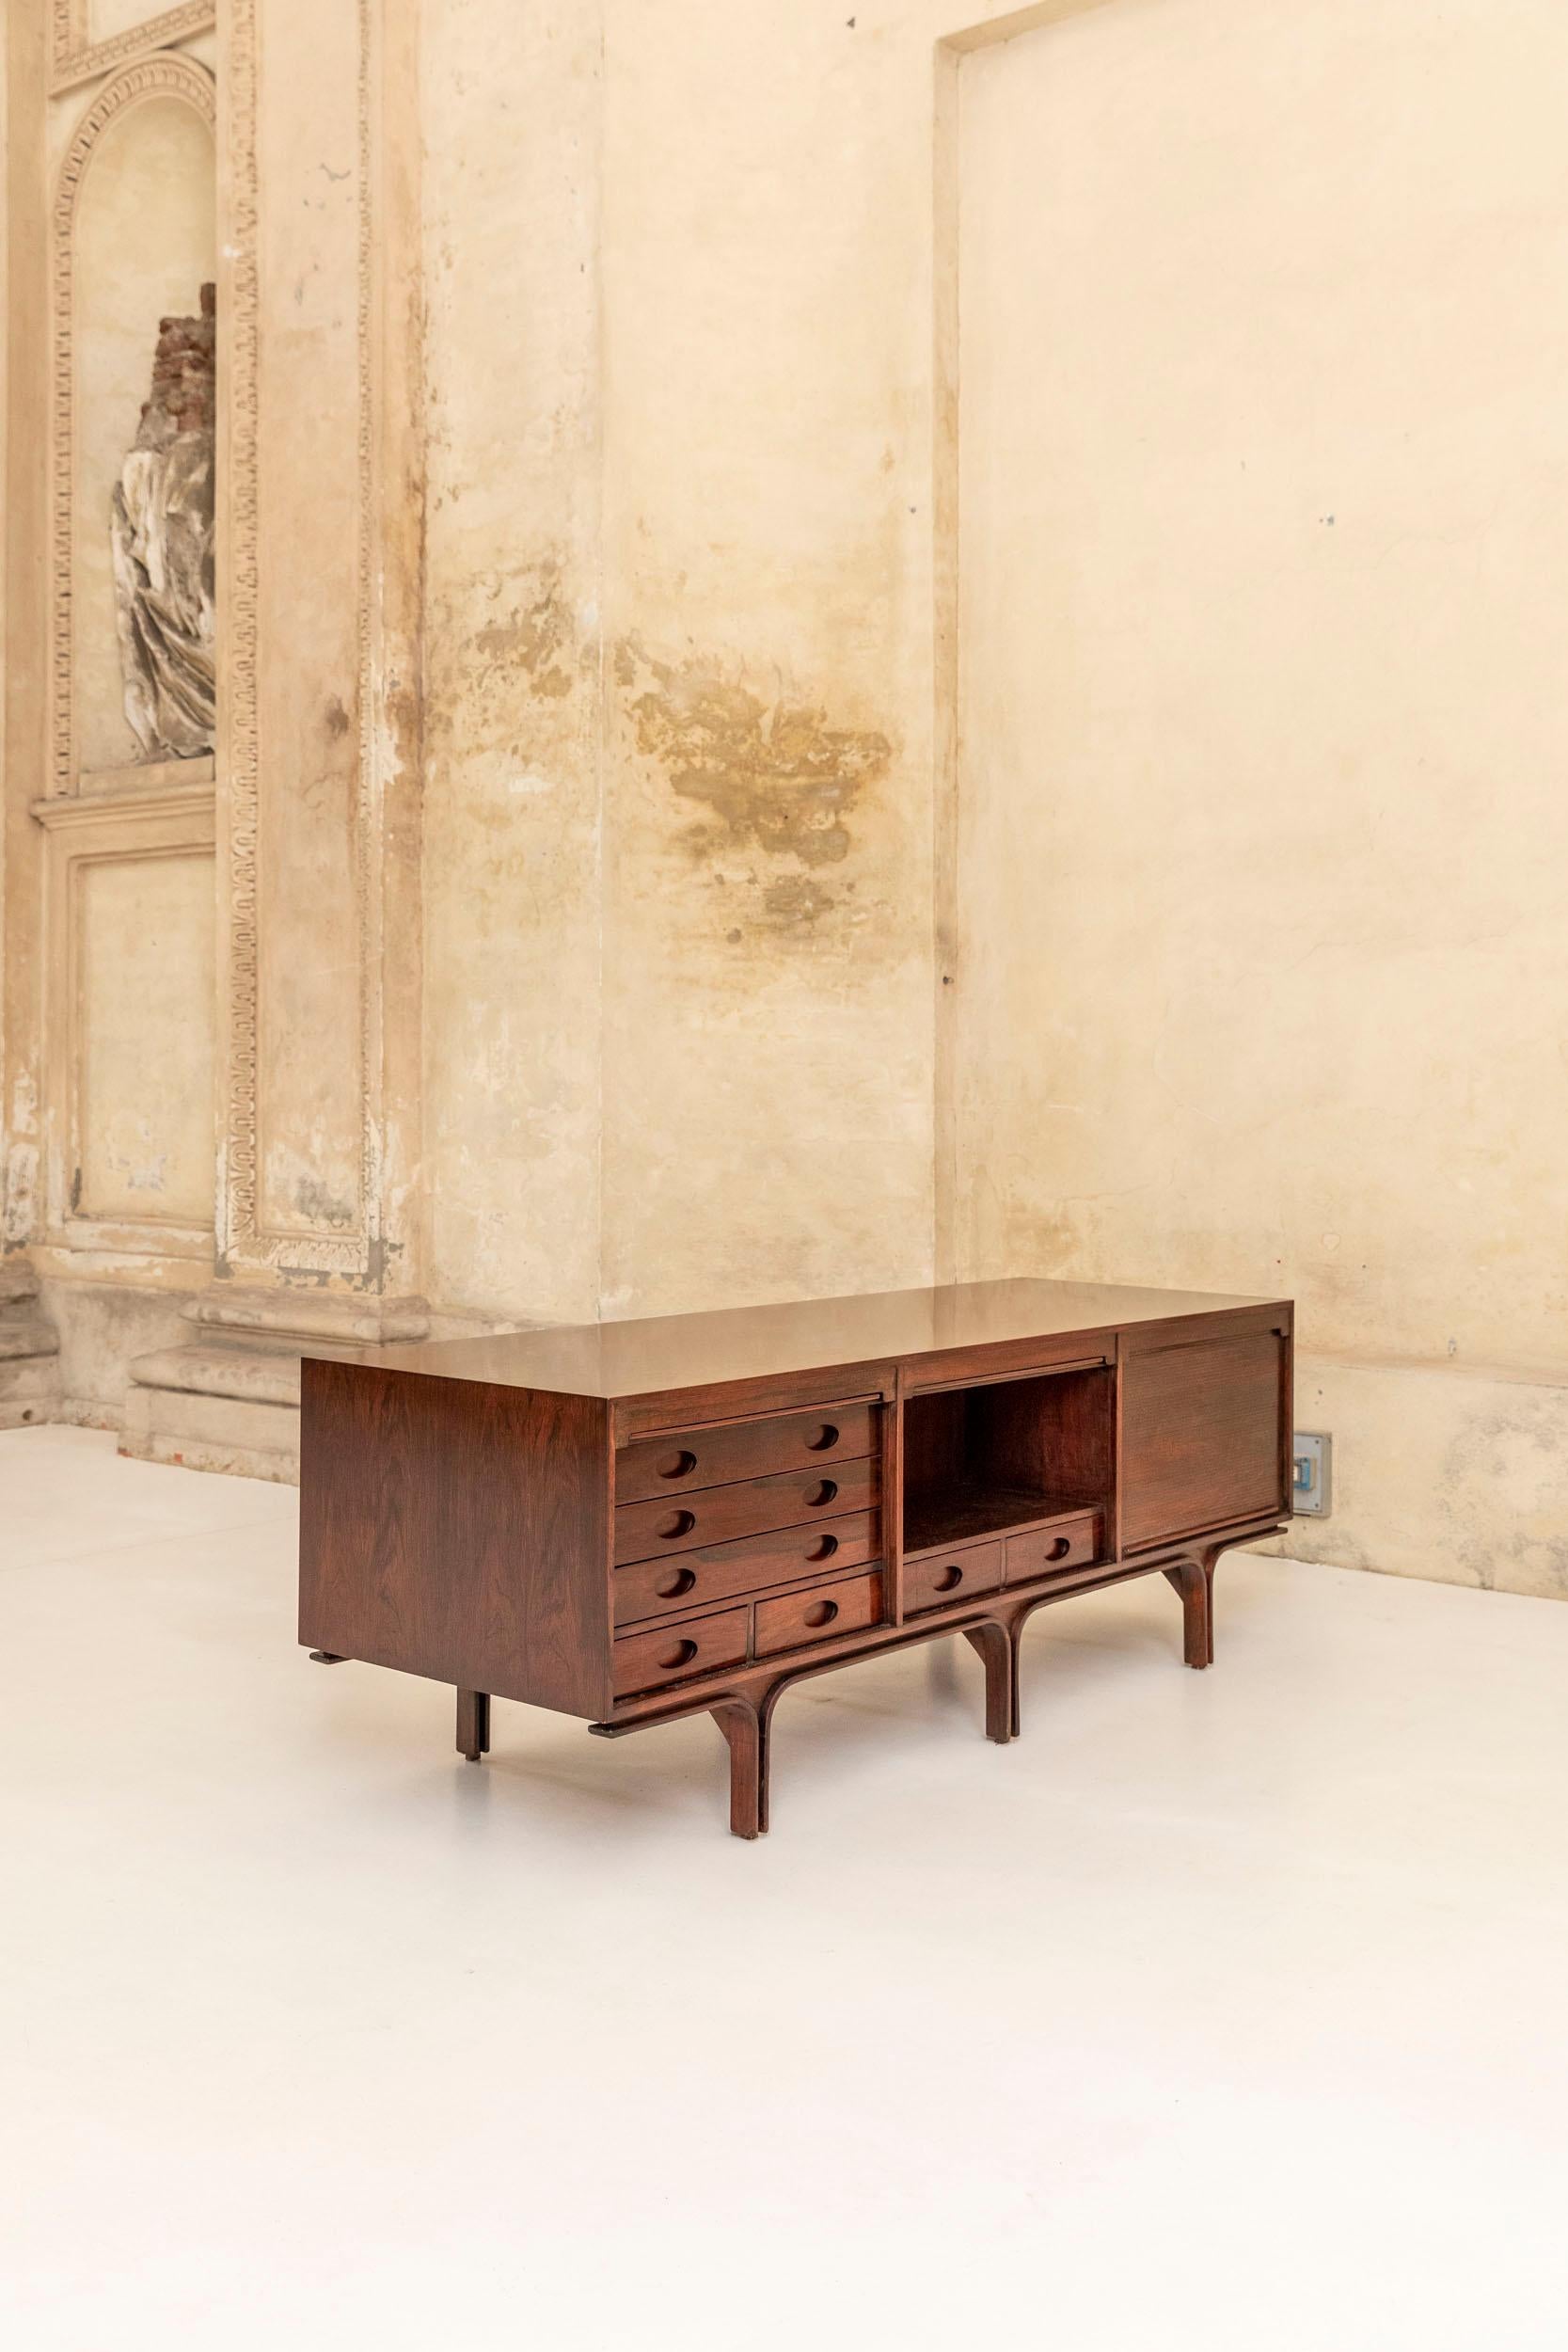 Bilateral Sideboard by Gianfranco Frattini for Bernini In Excellent Condition For Sale In Piacenza, Italy